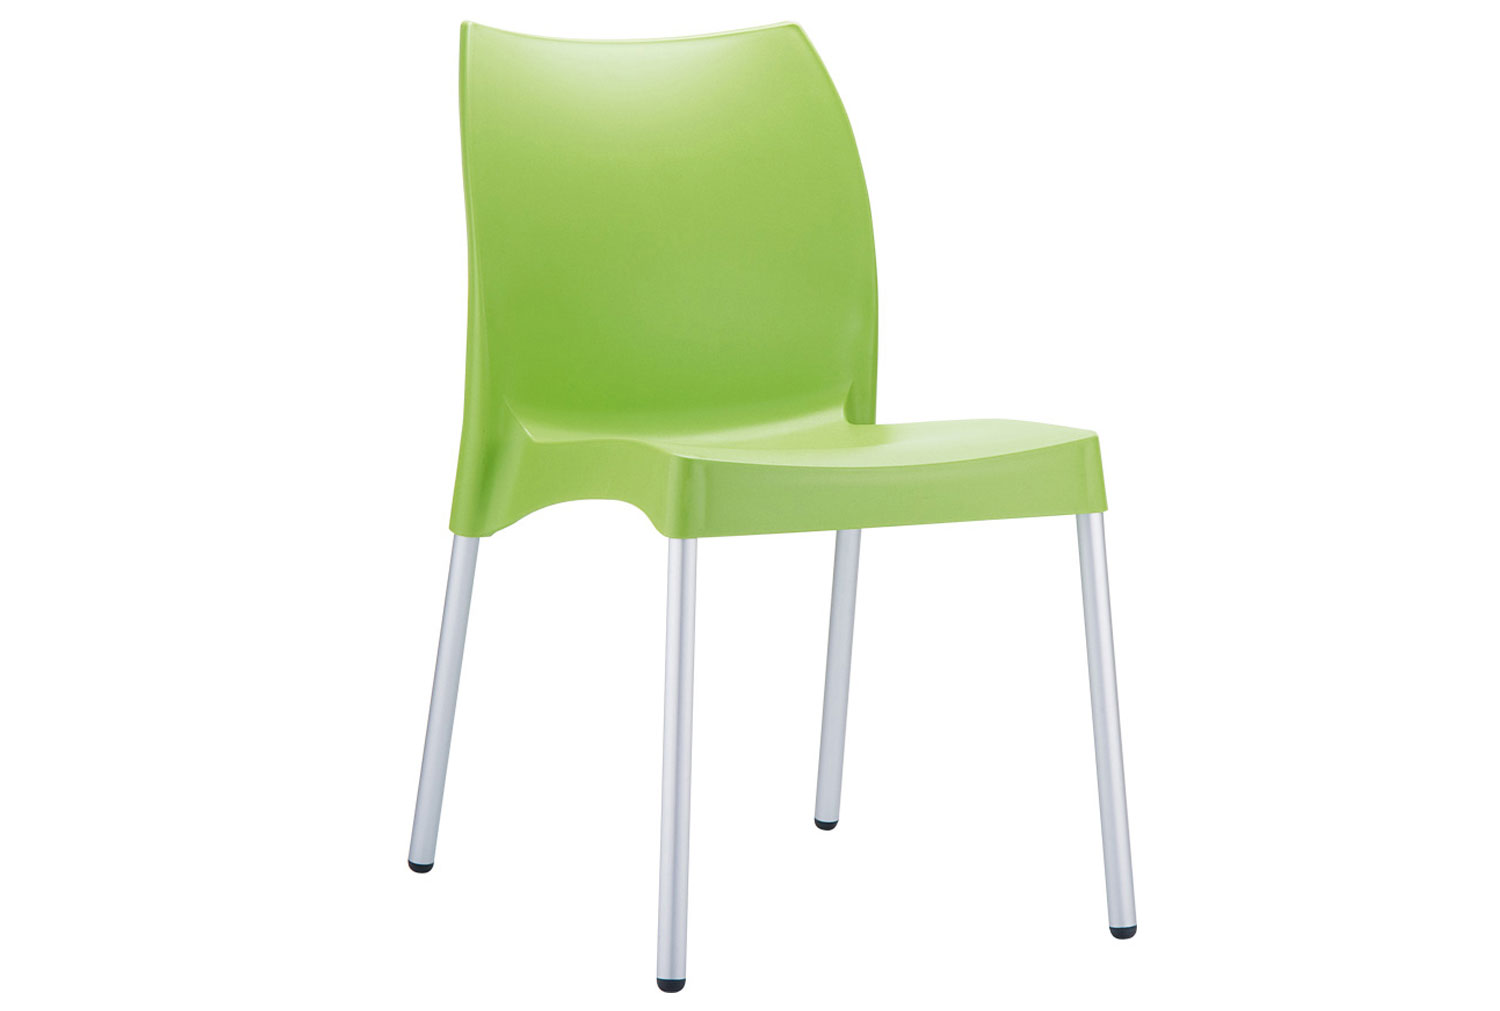 Qty 2 - Iliara Stacking Side Office Chair, Green